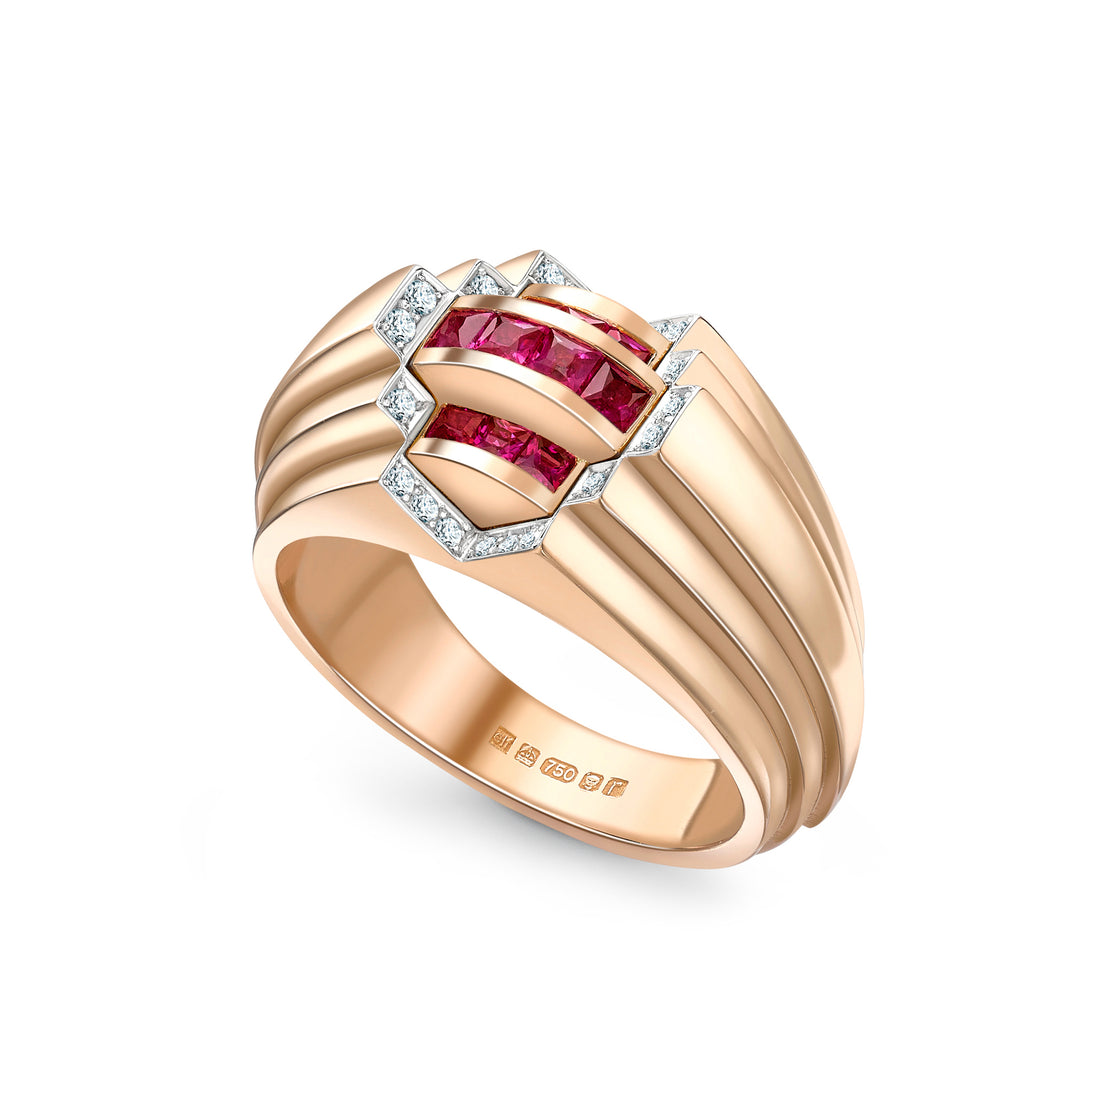  Pink Sapphire & Diamond Stepped Ring by Emma Franklin | The Cut London